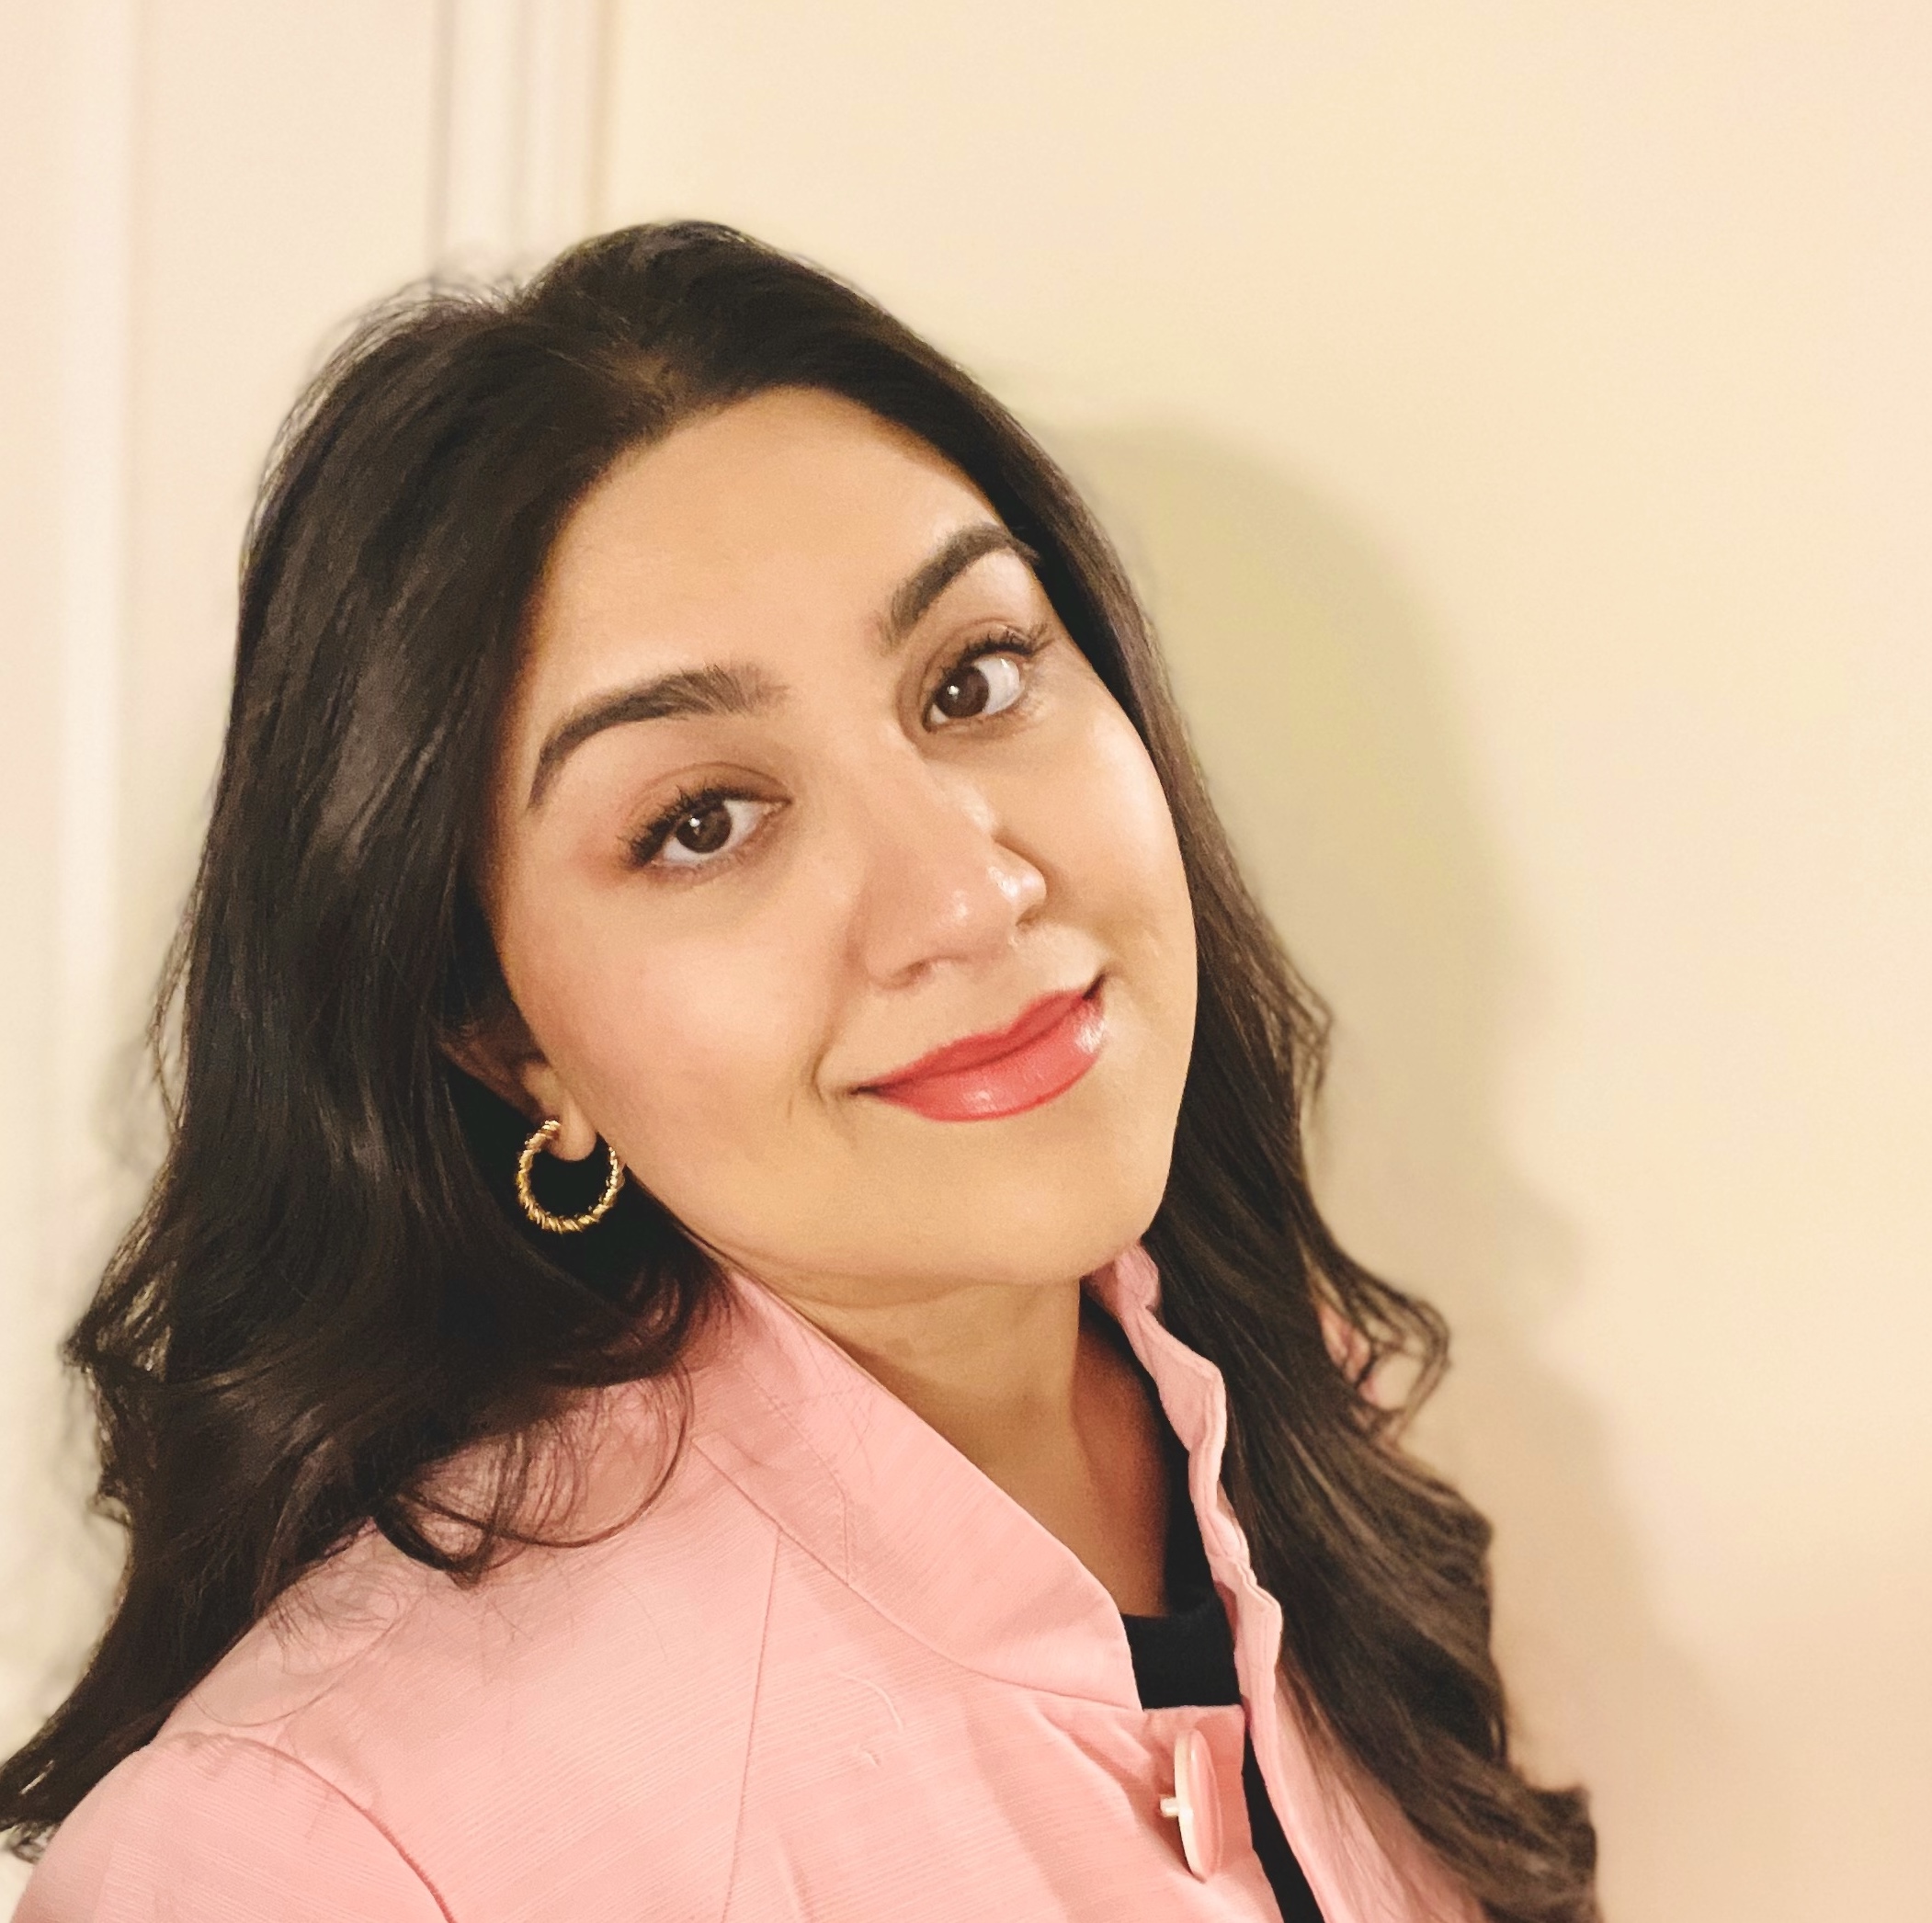 Nida smiling in a pink jacket in front of a white wall. 